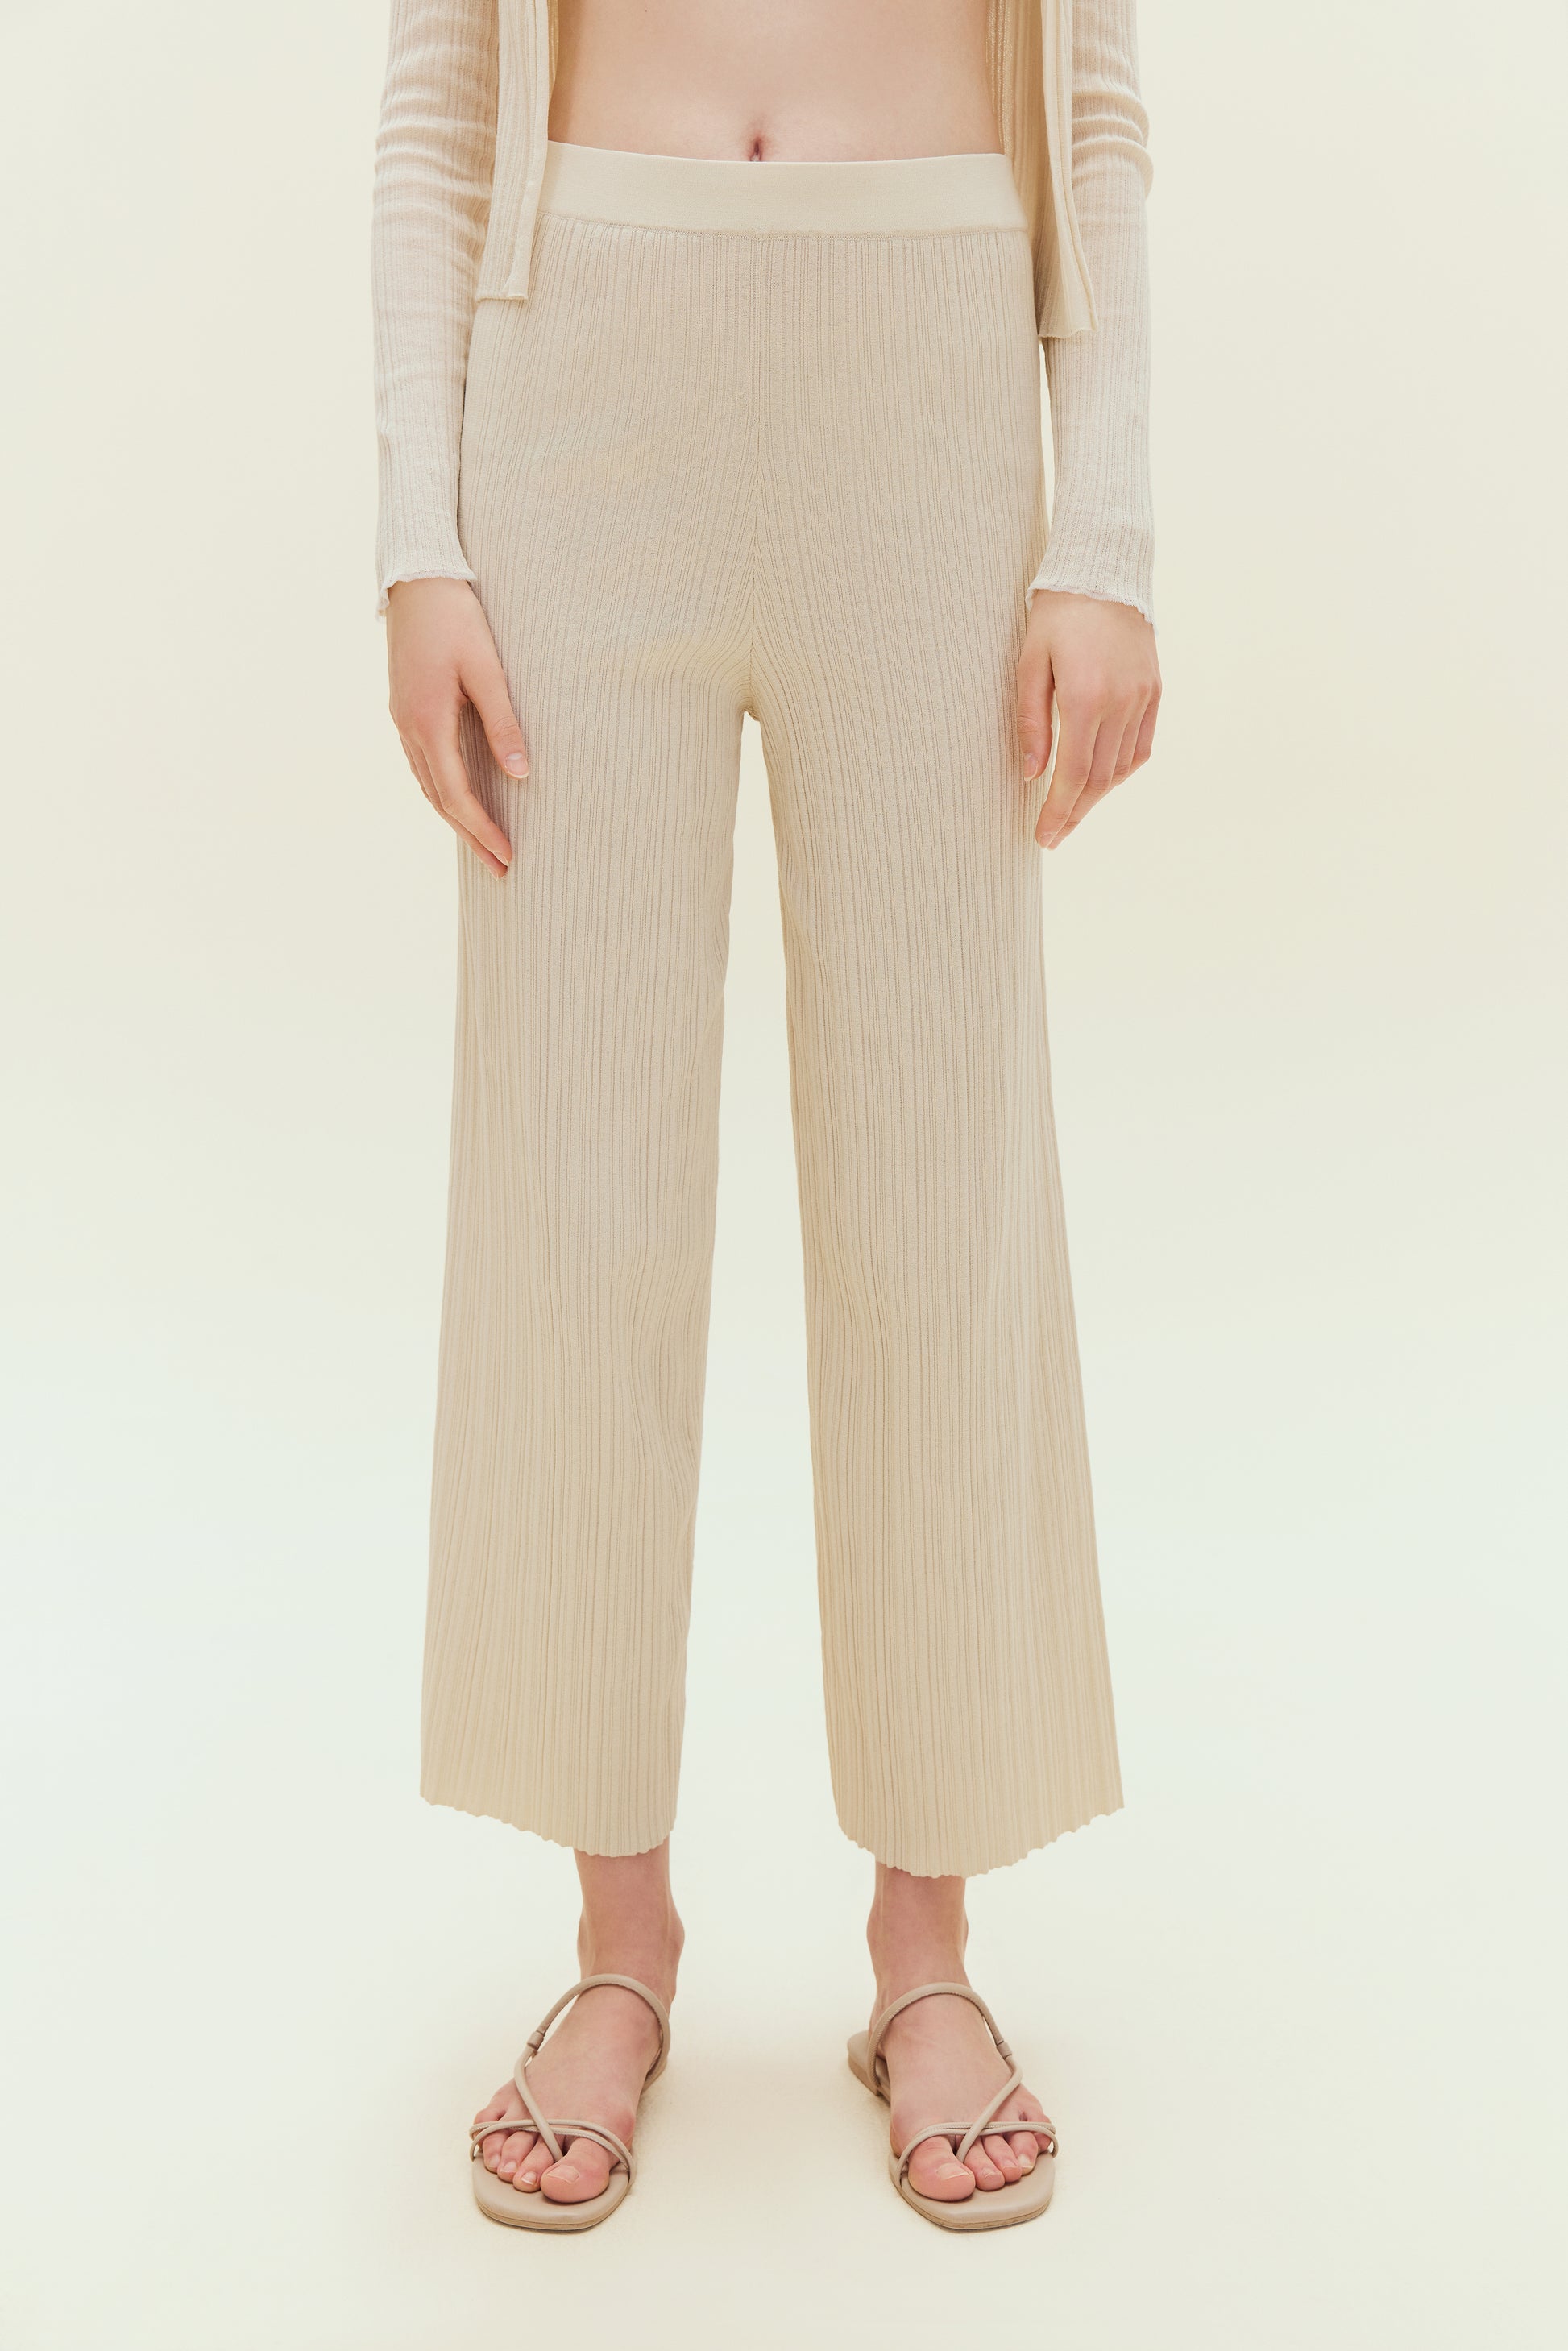 Woman standing wearing off white knit pants